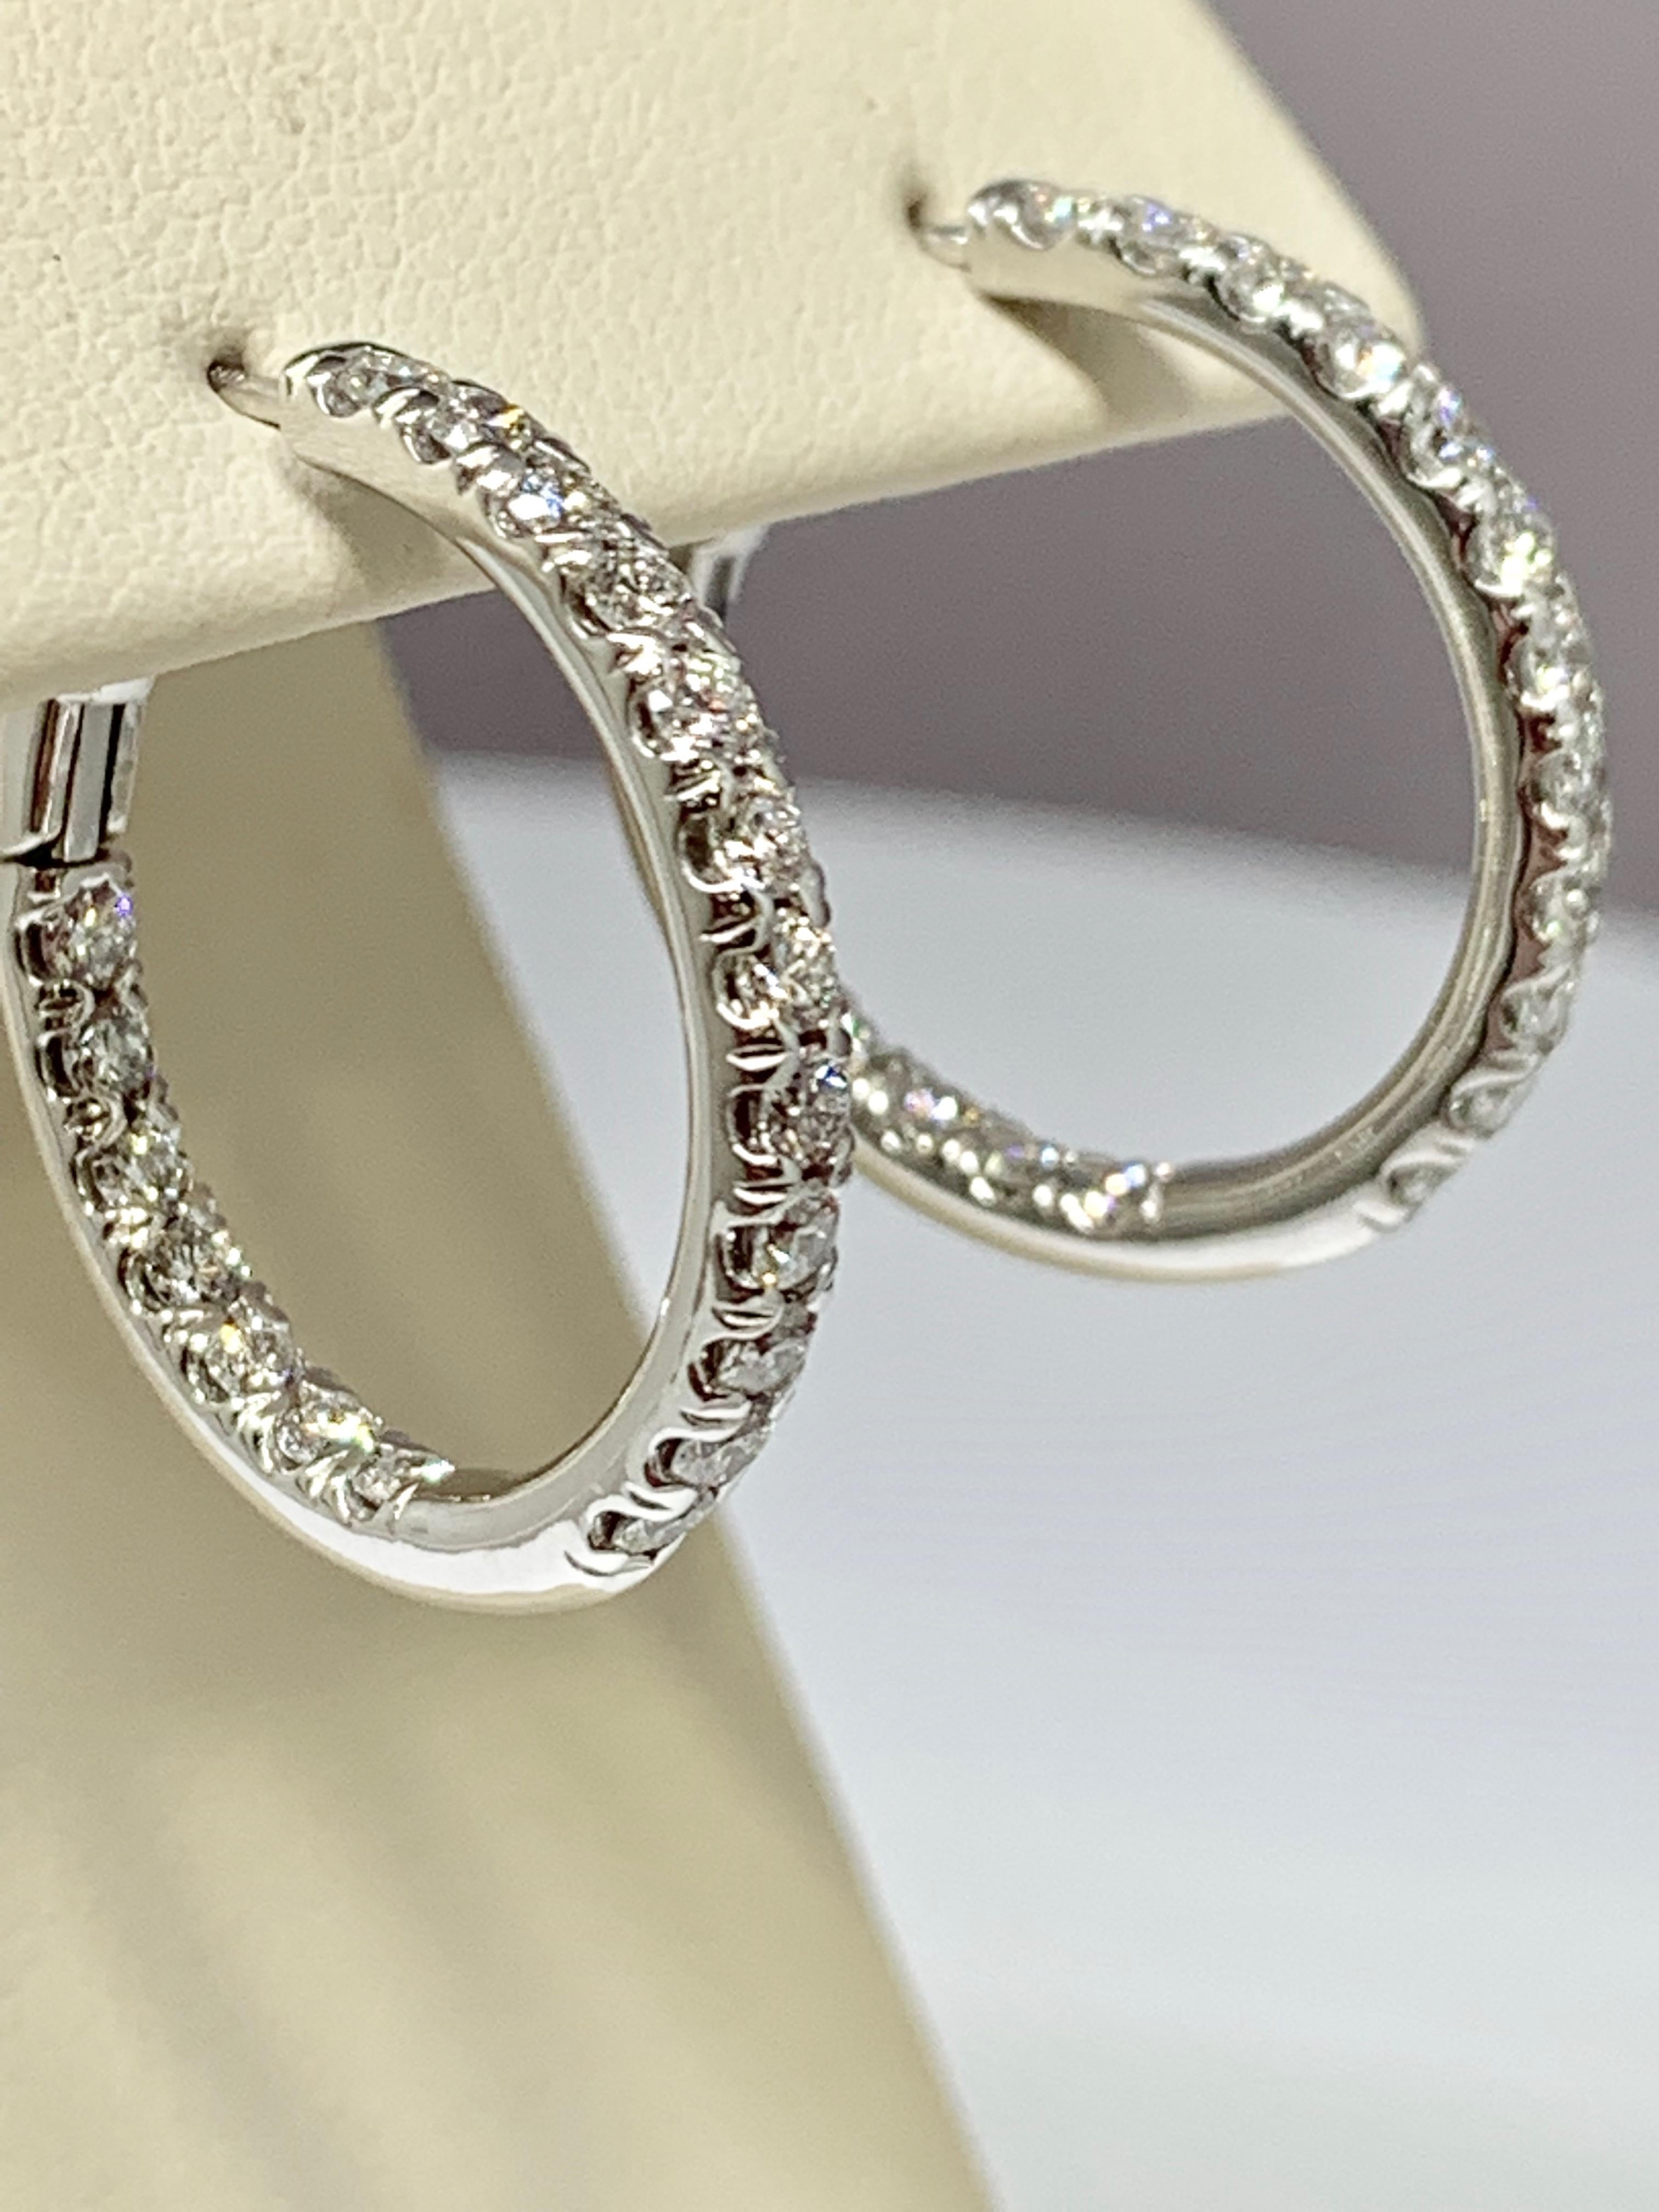 Contemporary White Gold 1.30 Carat Total Weight Round Diamond Inside-Outside Hoop Earrings For Sale